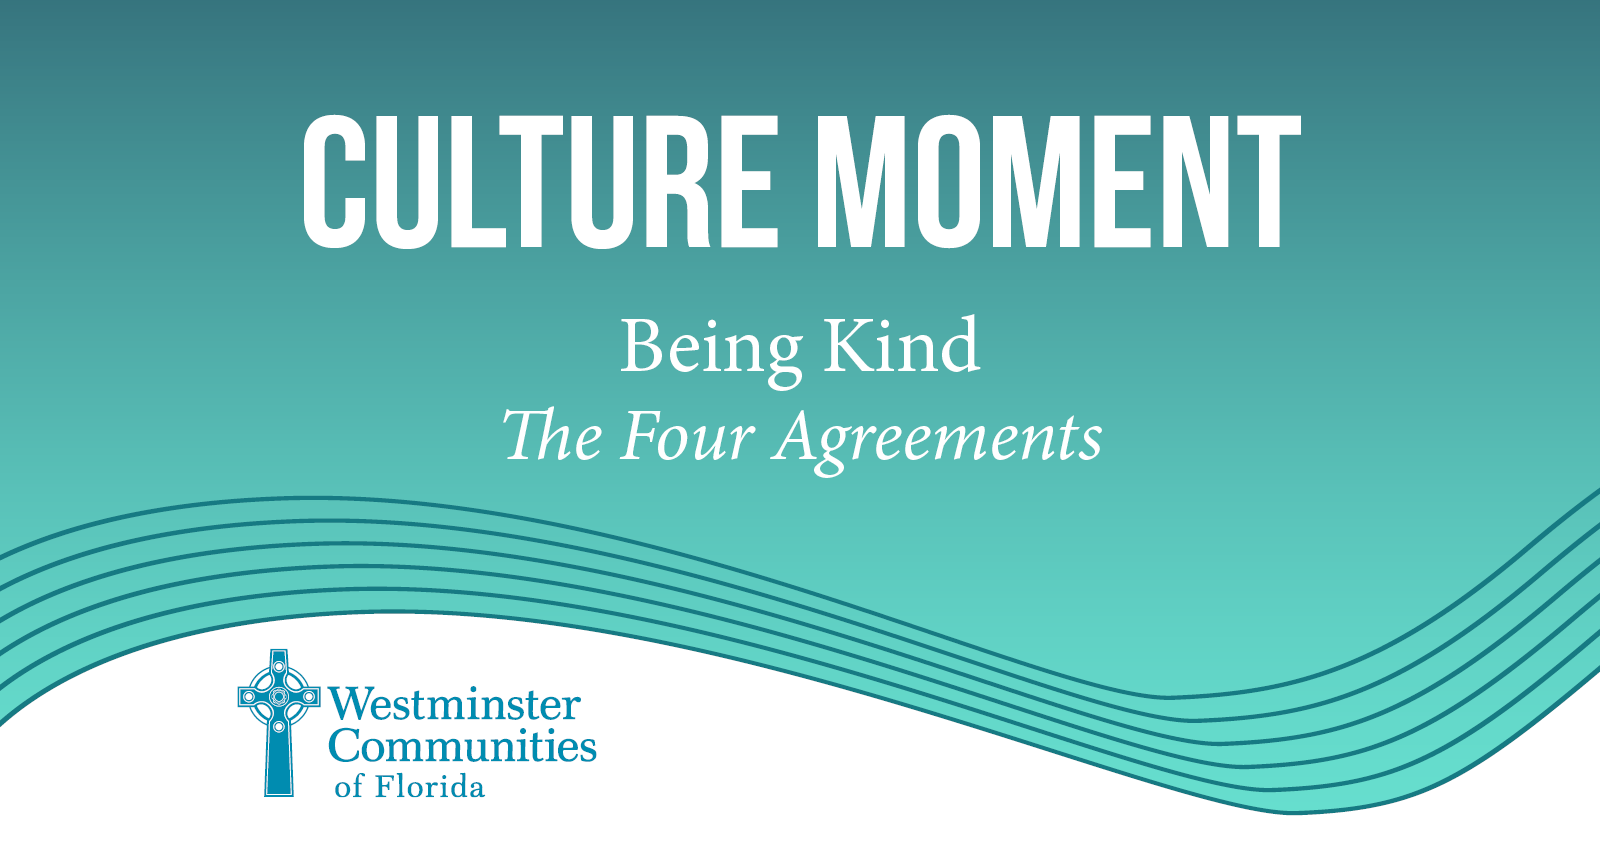 Culture Moment: Kindness - The 4 Agreements